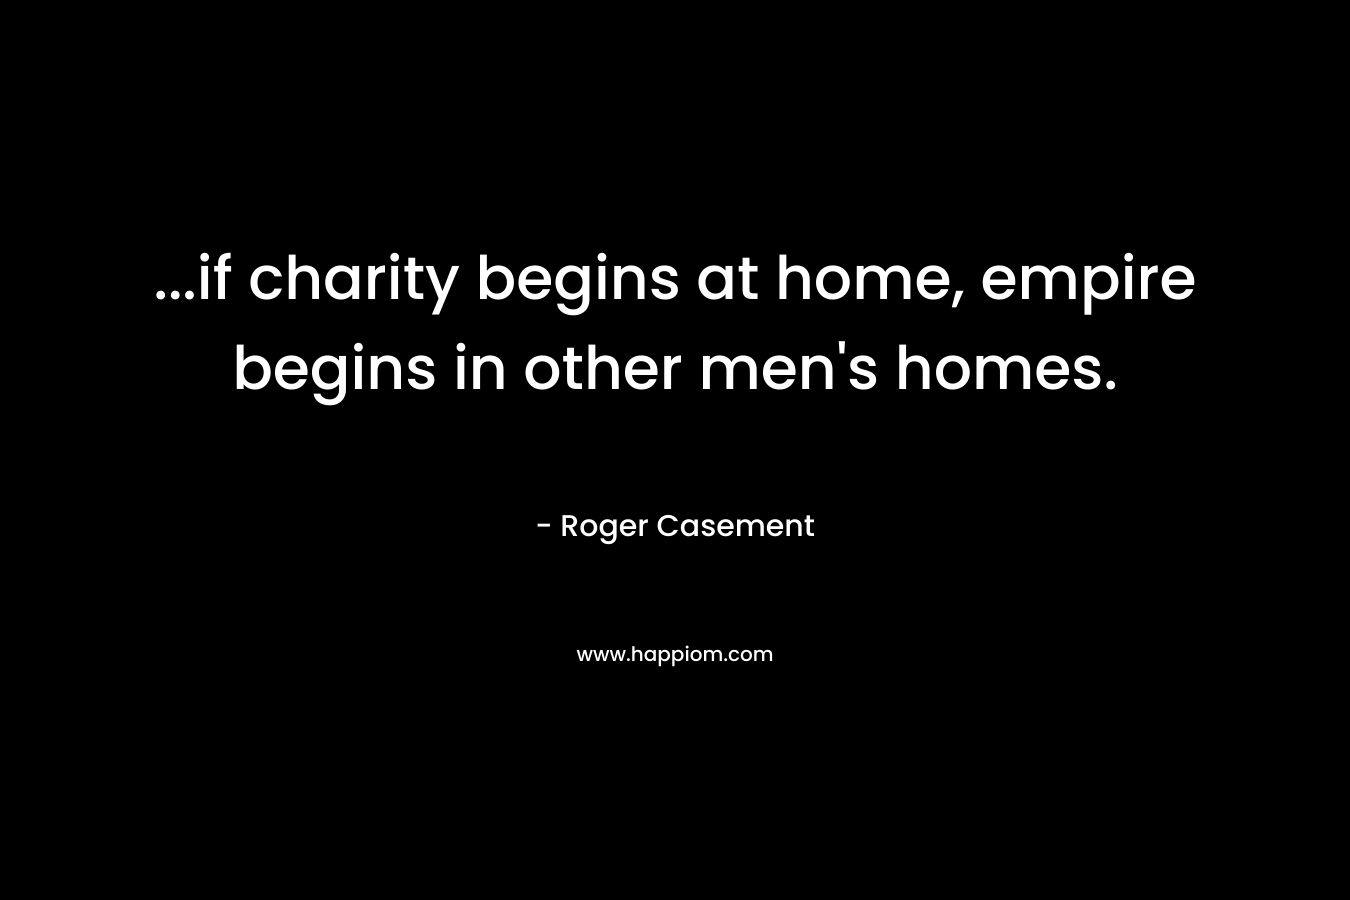 …if charity begins at home, empire begins in other men’s homes. – Roger Casement